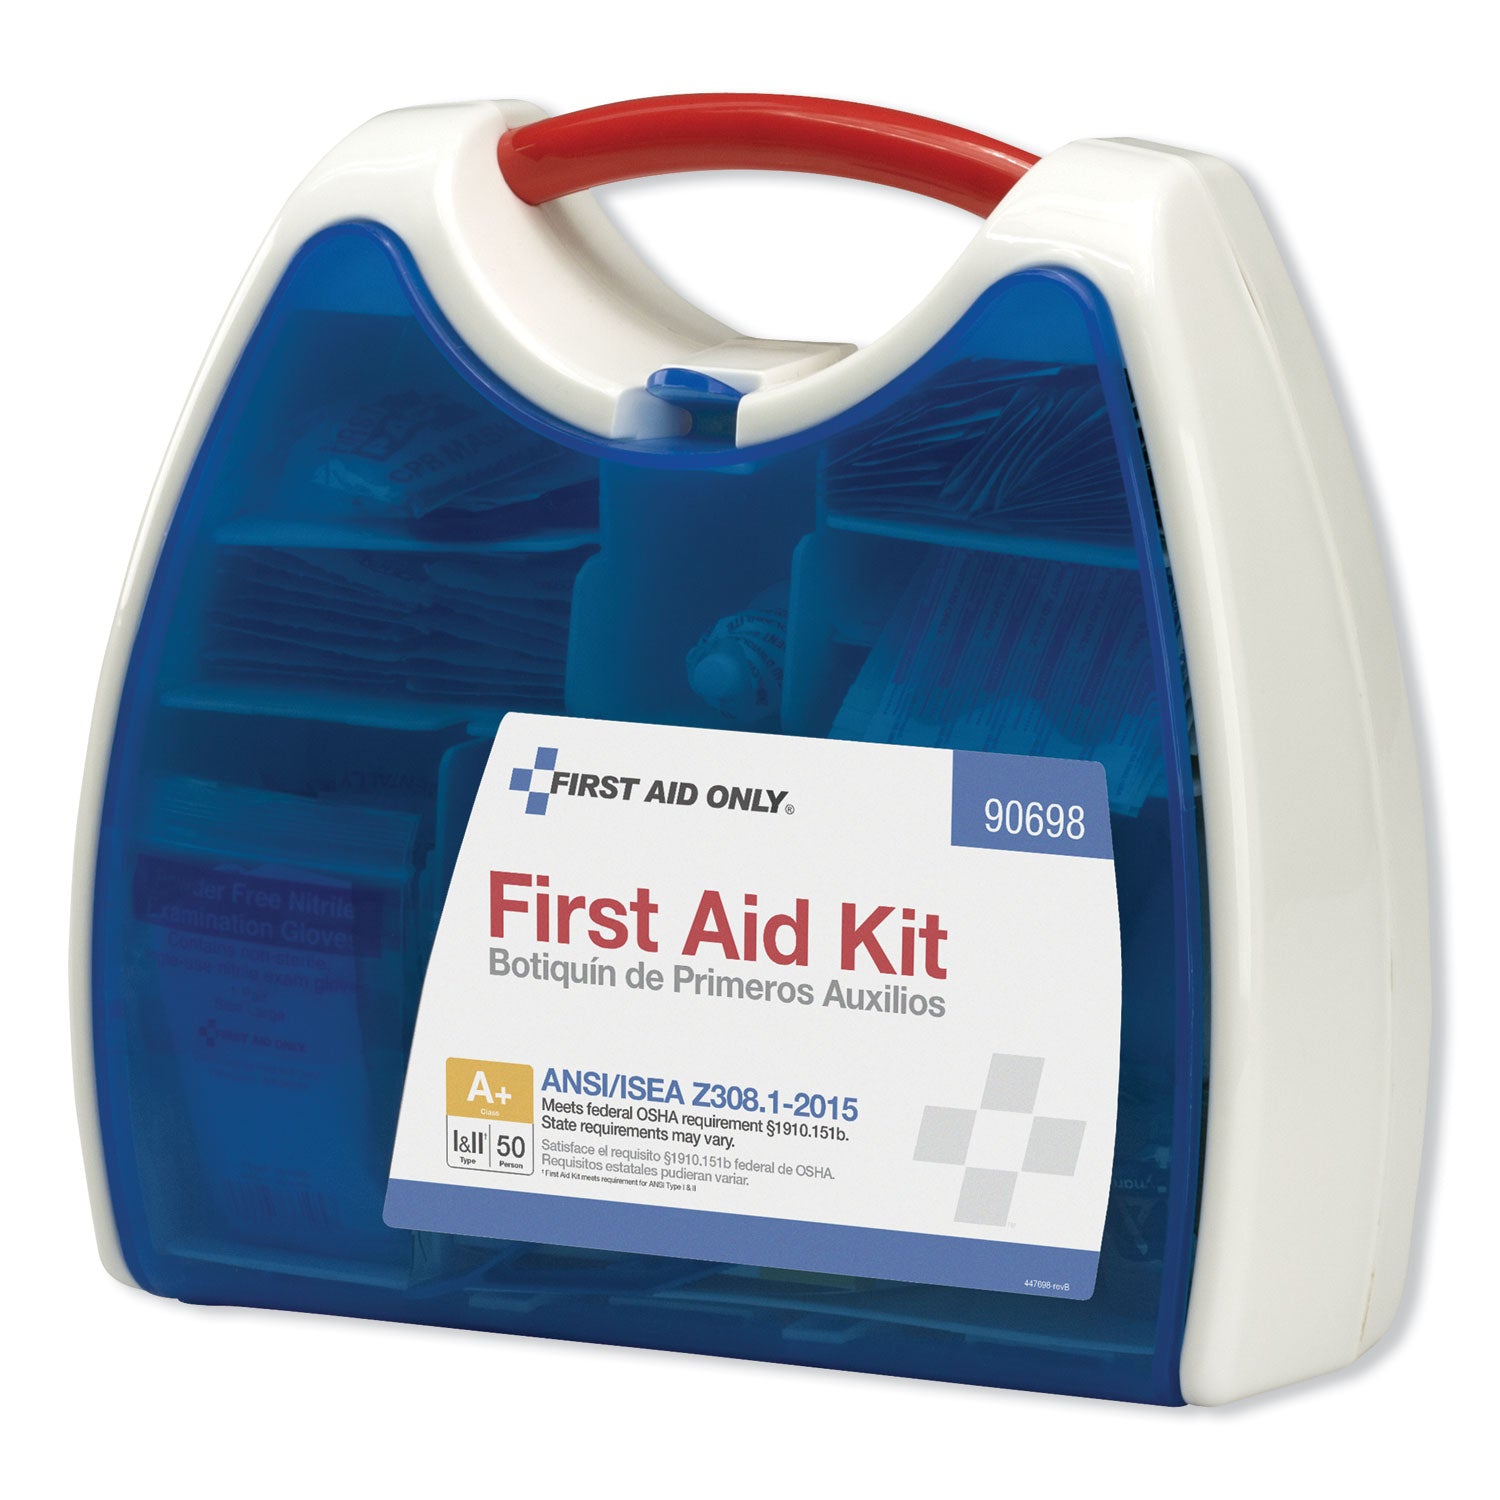 readycare-first-aid-kit-for-50-people-ansi-a+-238-pieces-plastic-case_fao90698 - 2